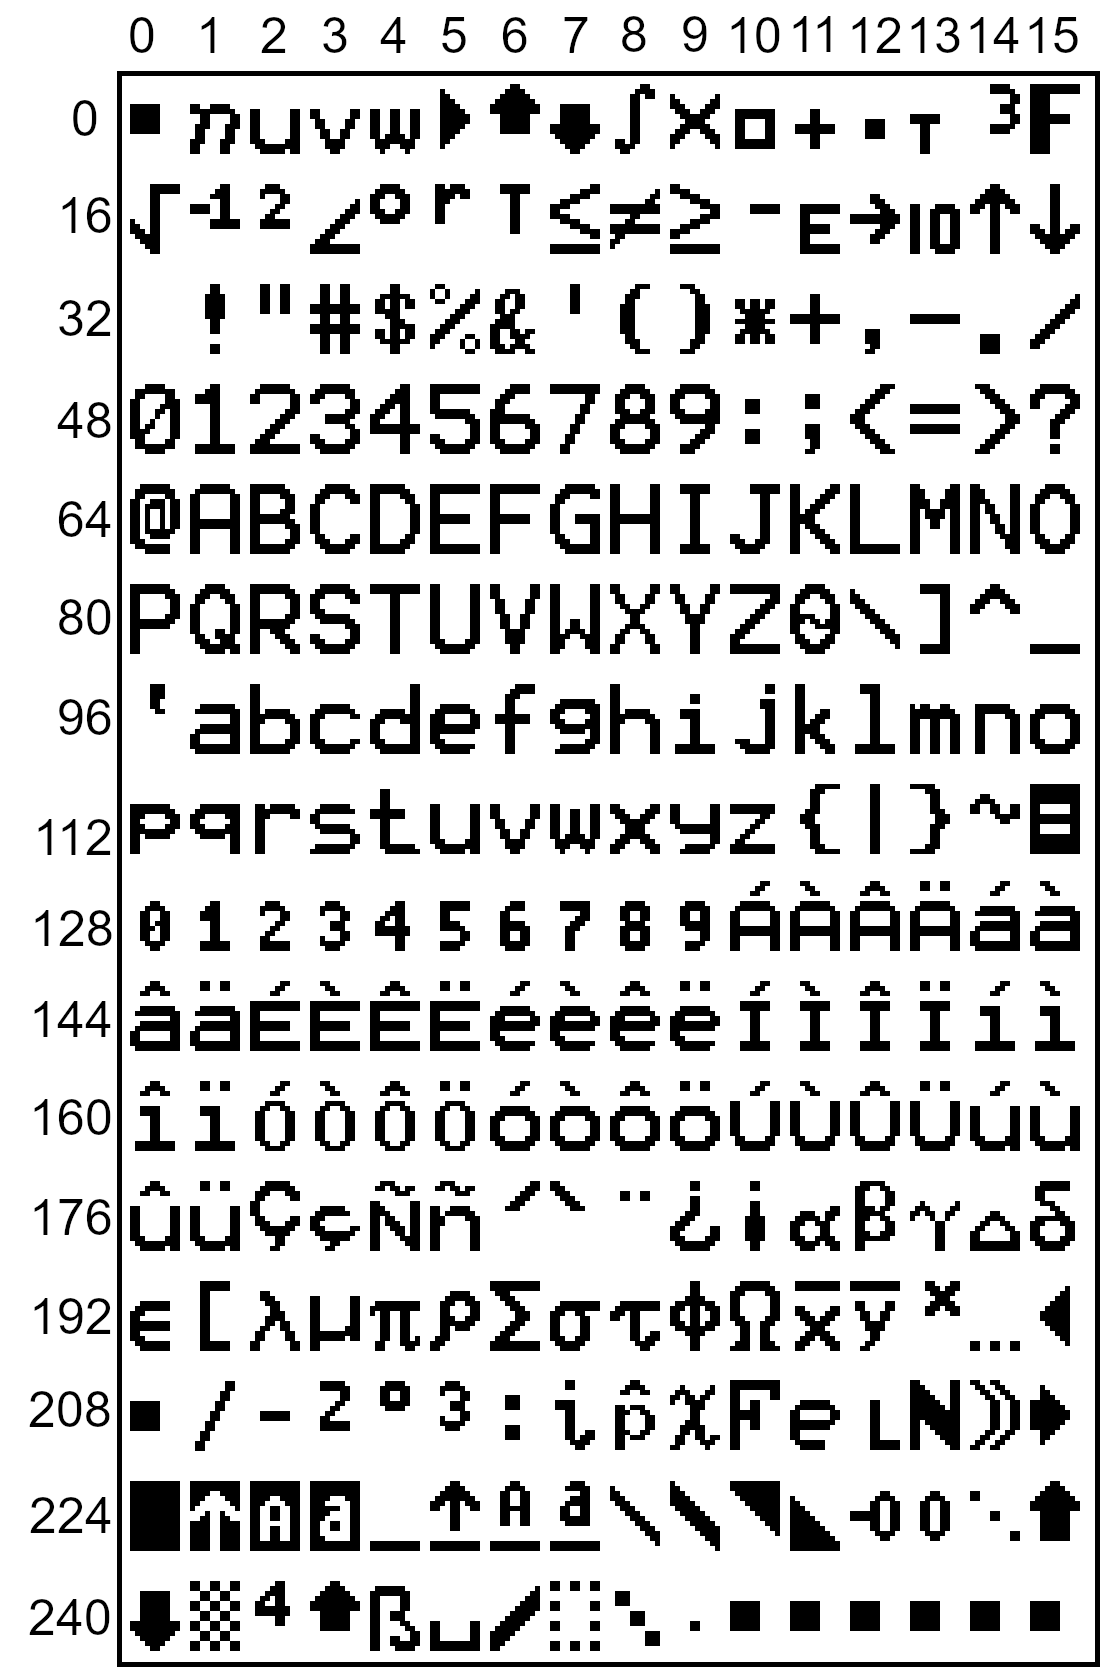 Chart for determining the code of a specific character (Large font)